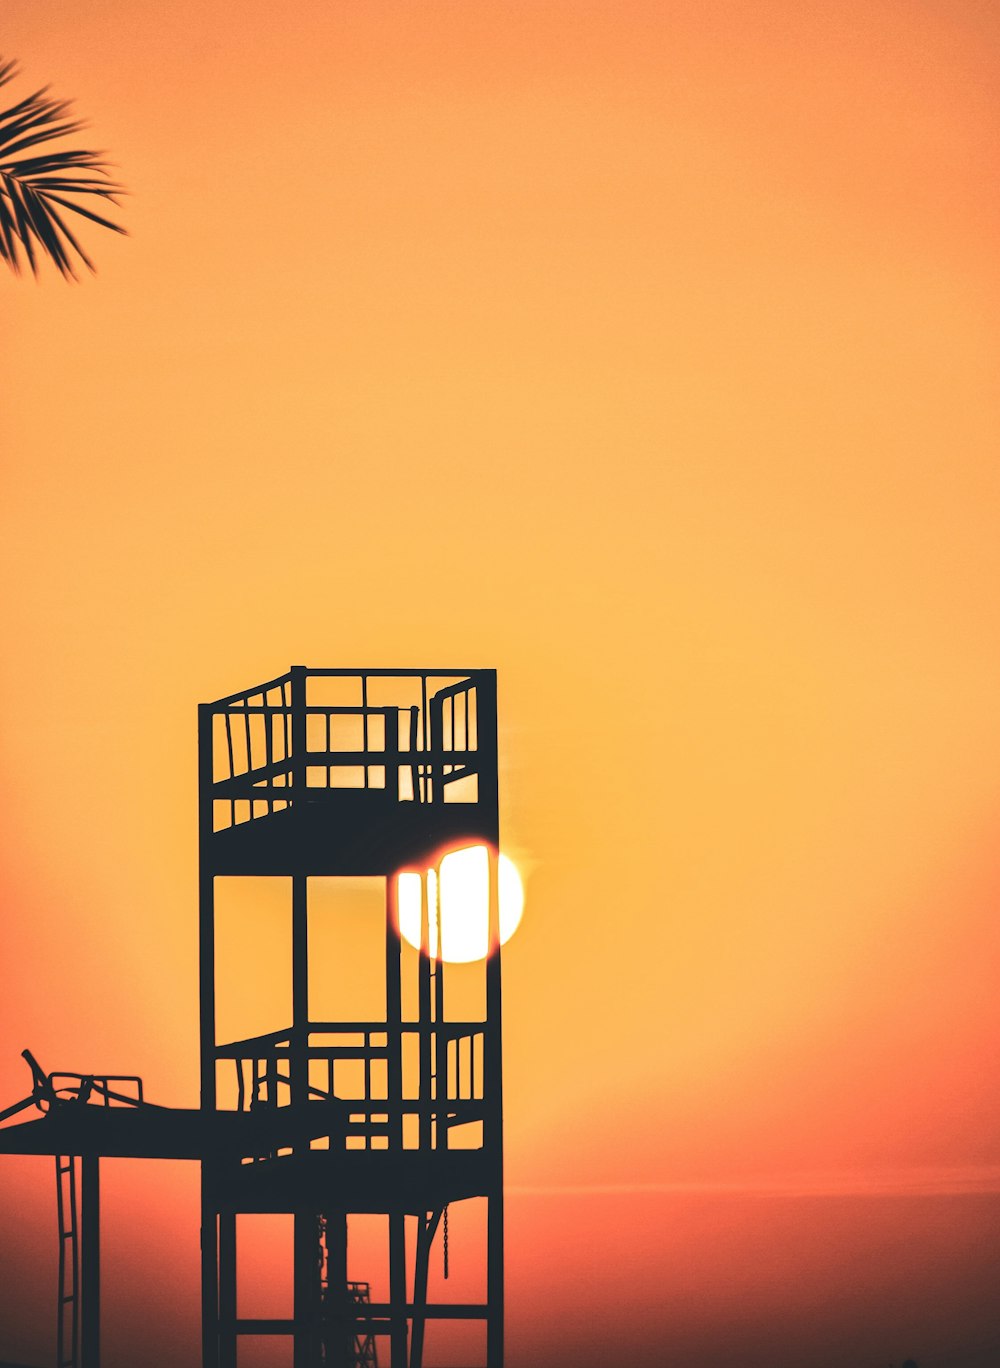 silhouette of watch tower during golden hour